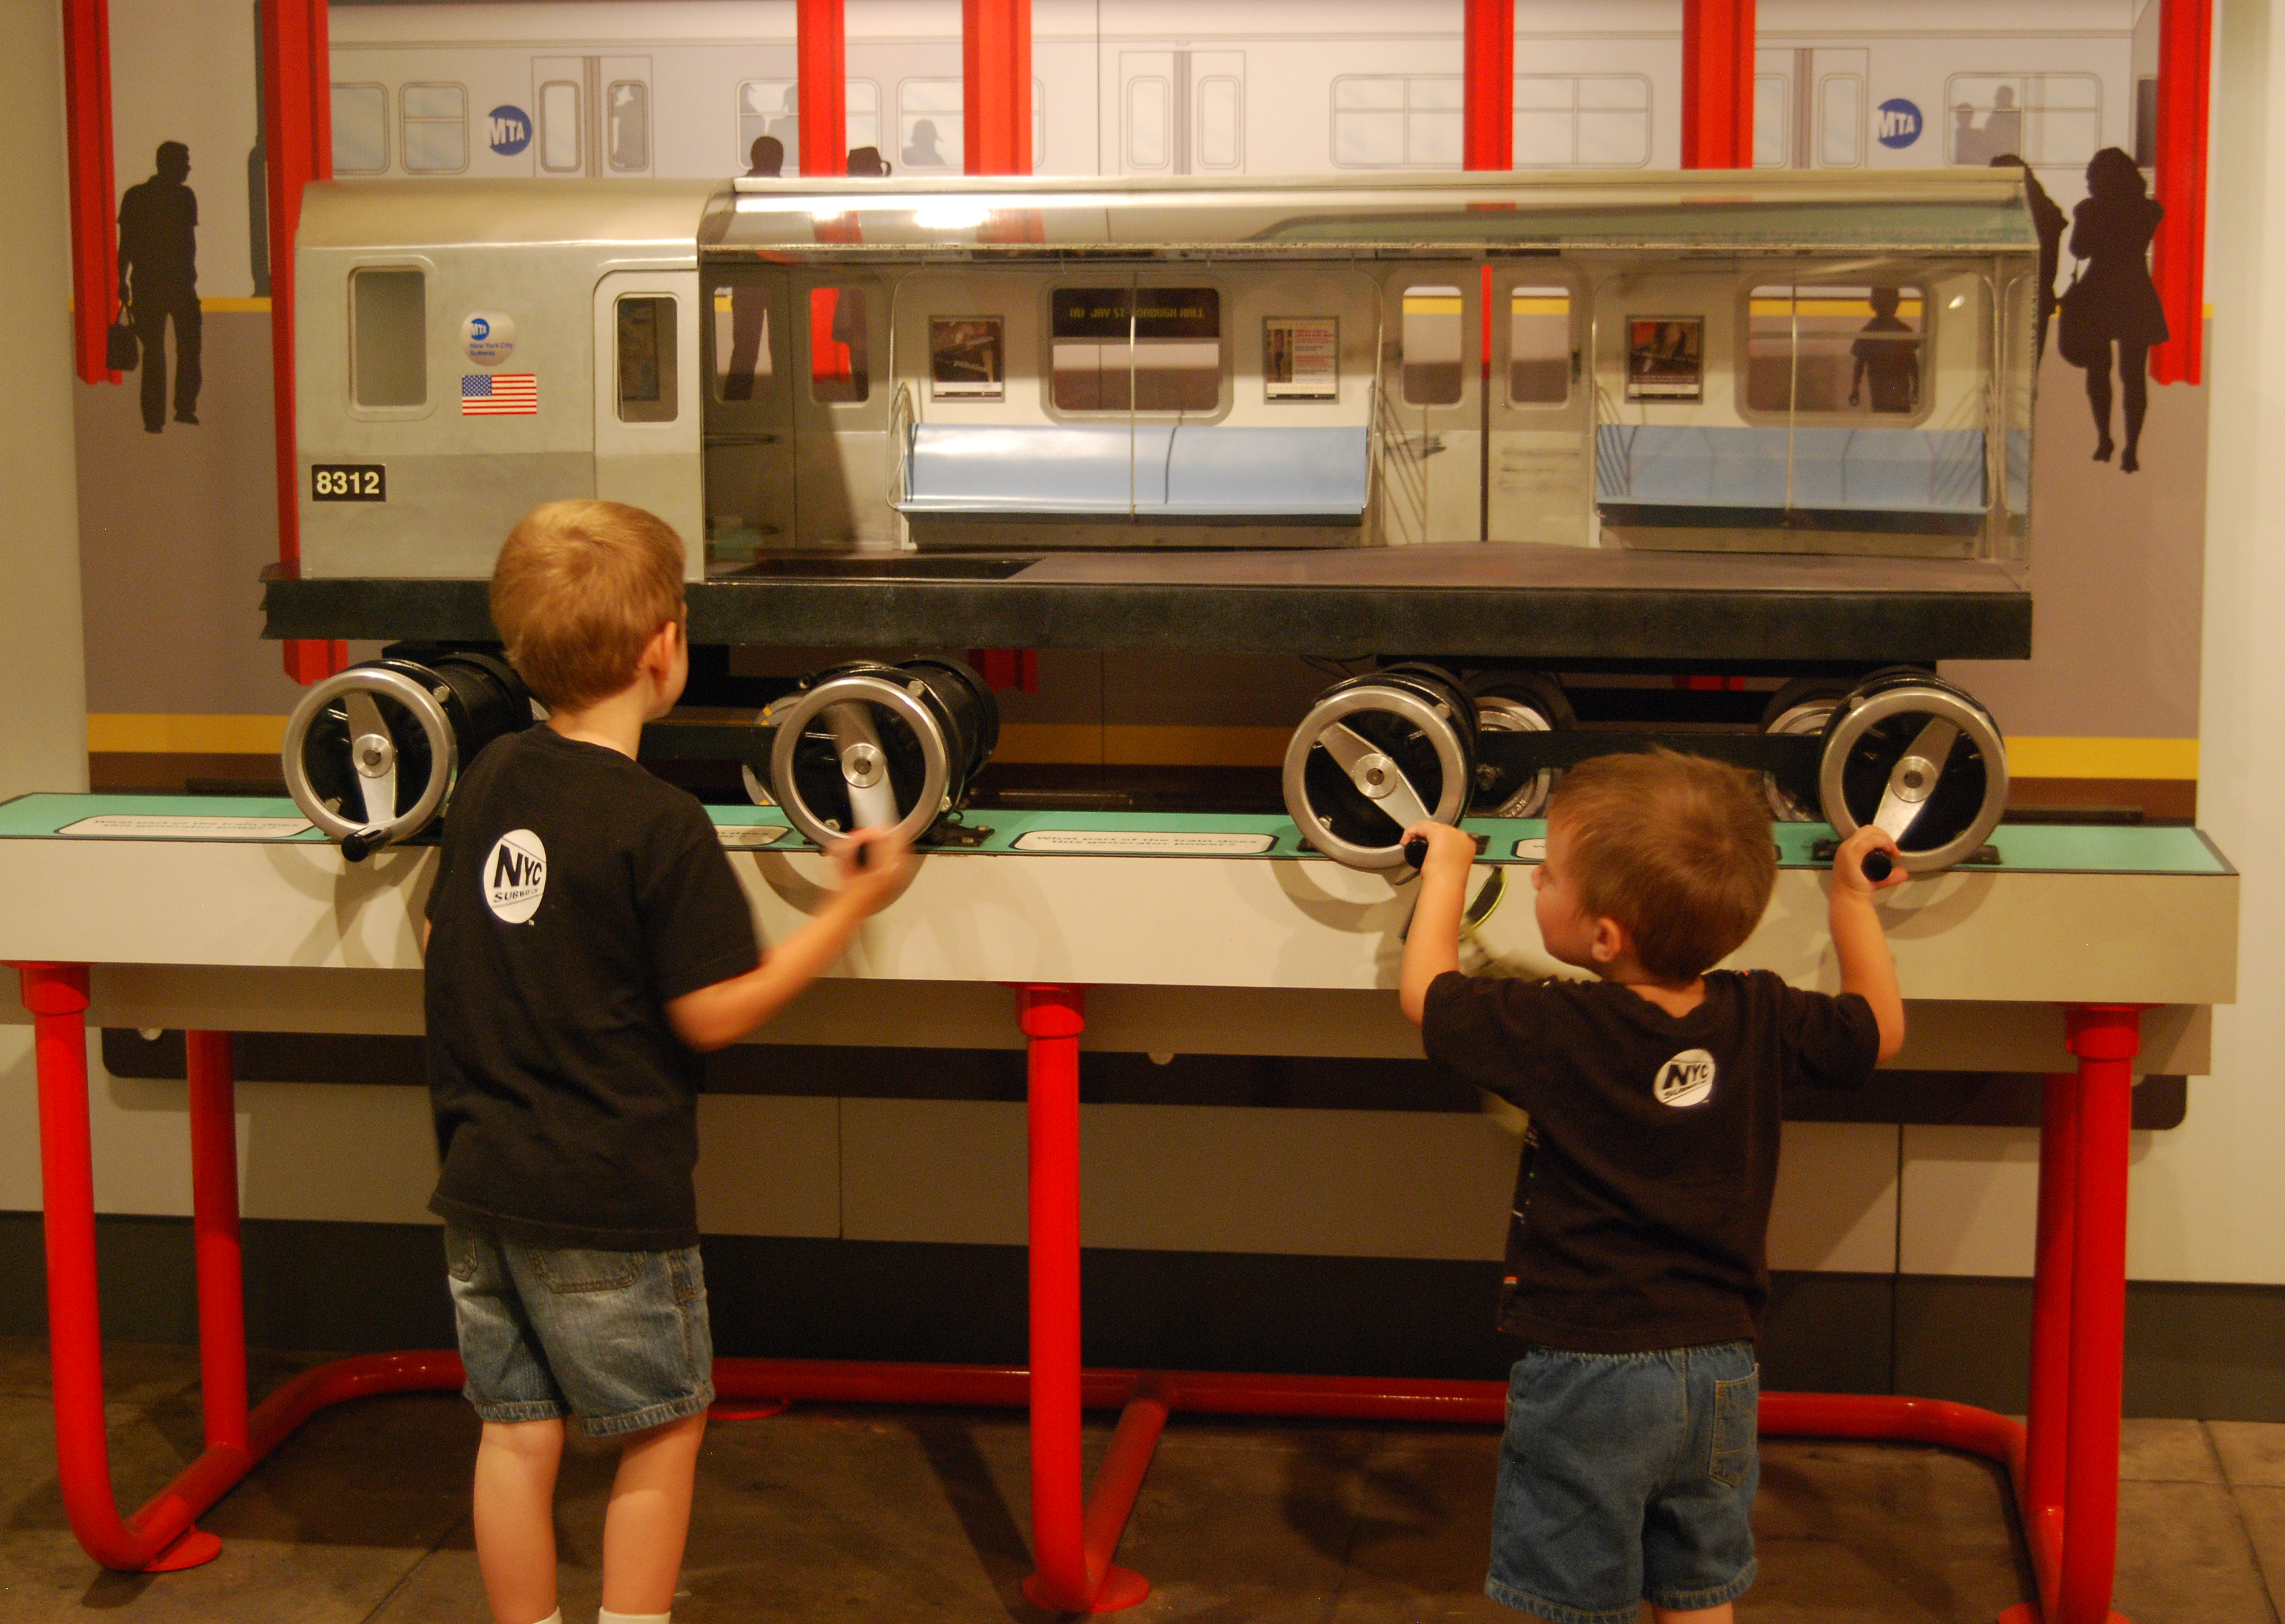 Kids in the ElectriCity Exhibit